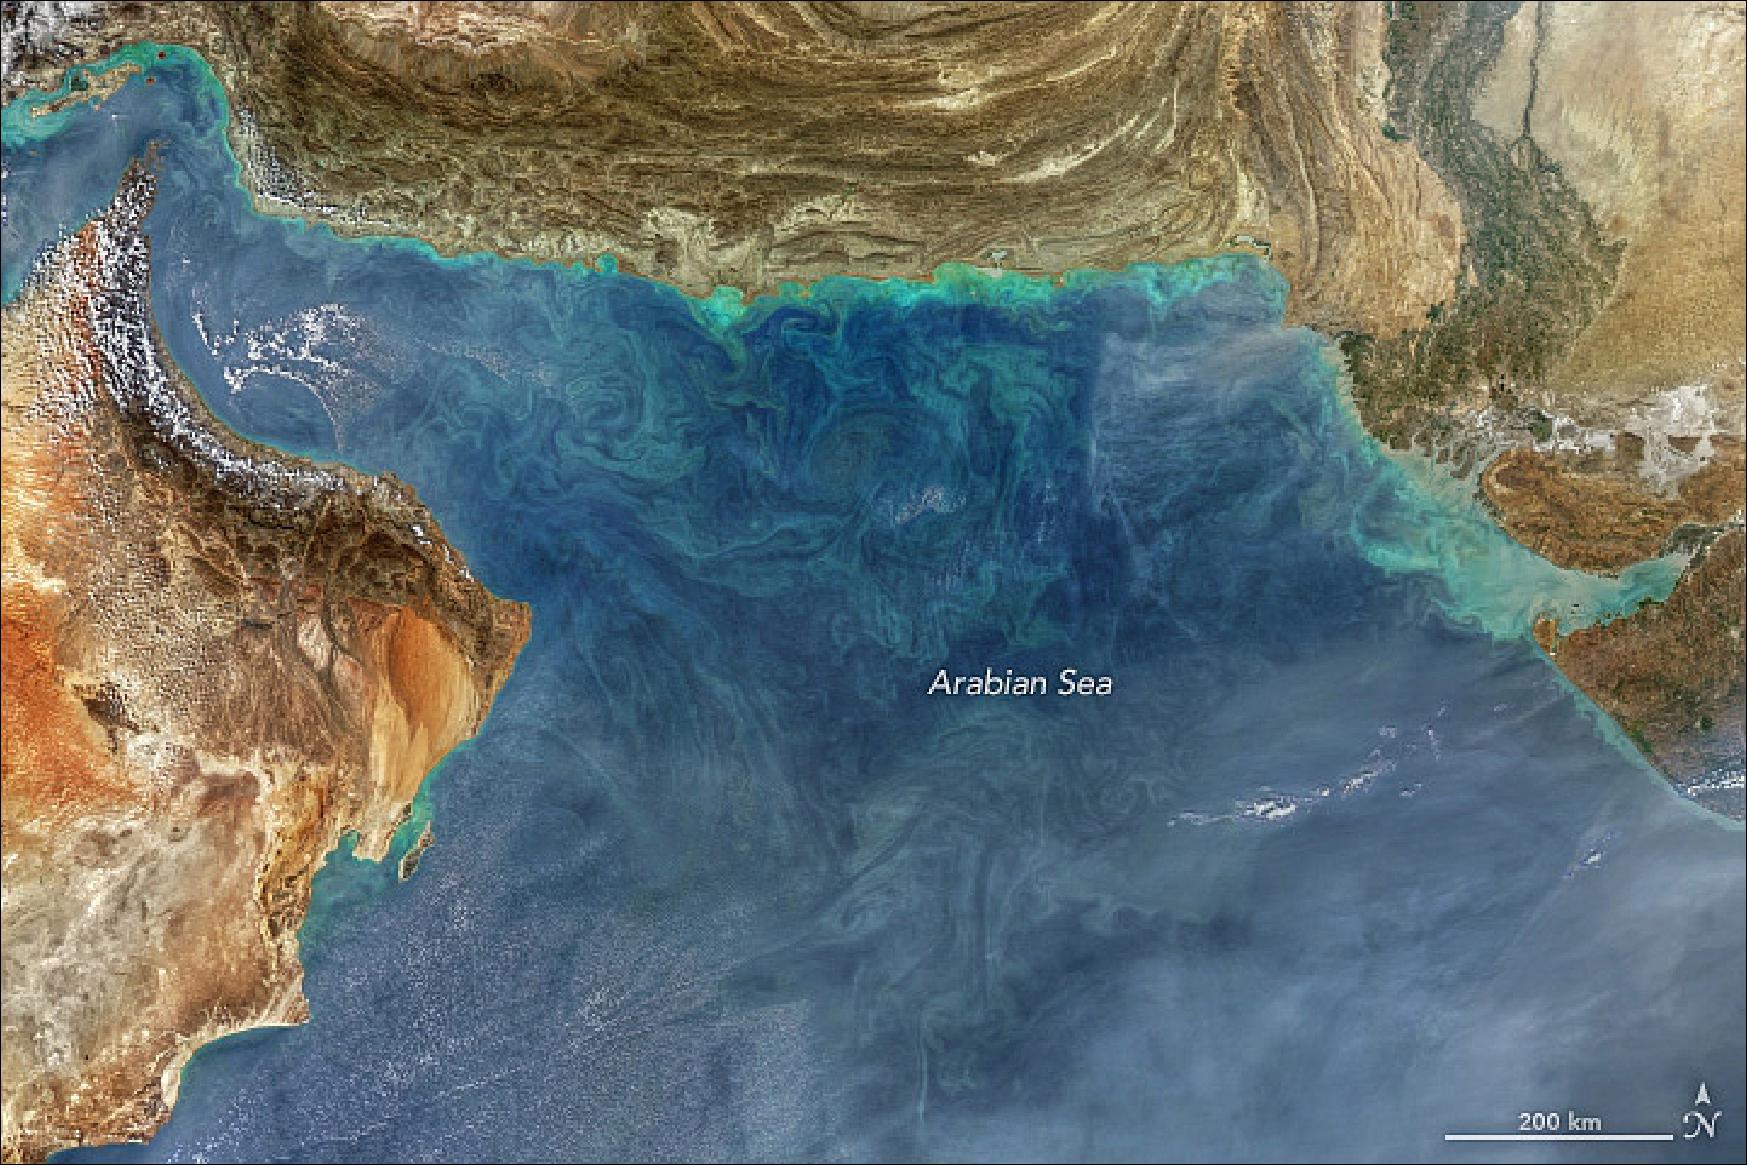 Figure 43: A colorful image of the Arabian Sea shows the various types of activities occurring in the waters, acquired with MODIS on Aqua on 23 November 2018 (image credit: NASA Earth Observatory, ocean imagery by Norman Kuring, NASA’s Ocean Color web. Story by Kasha Patel)